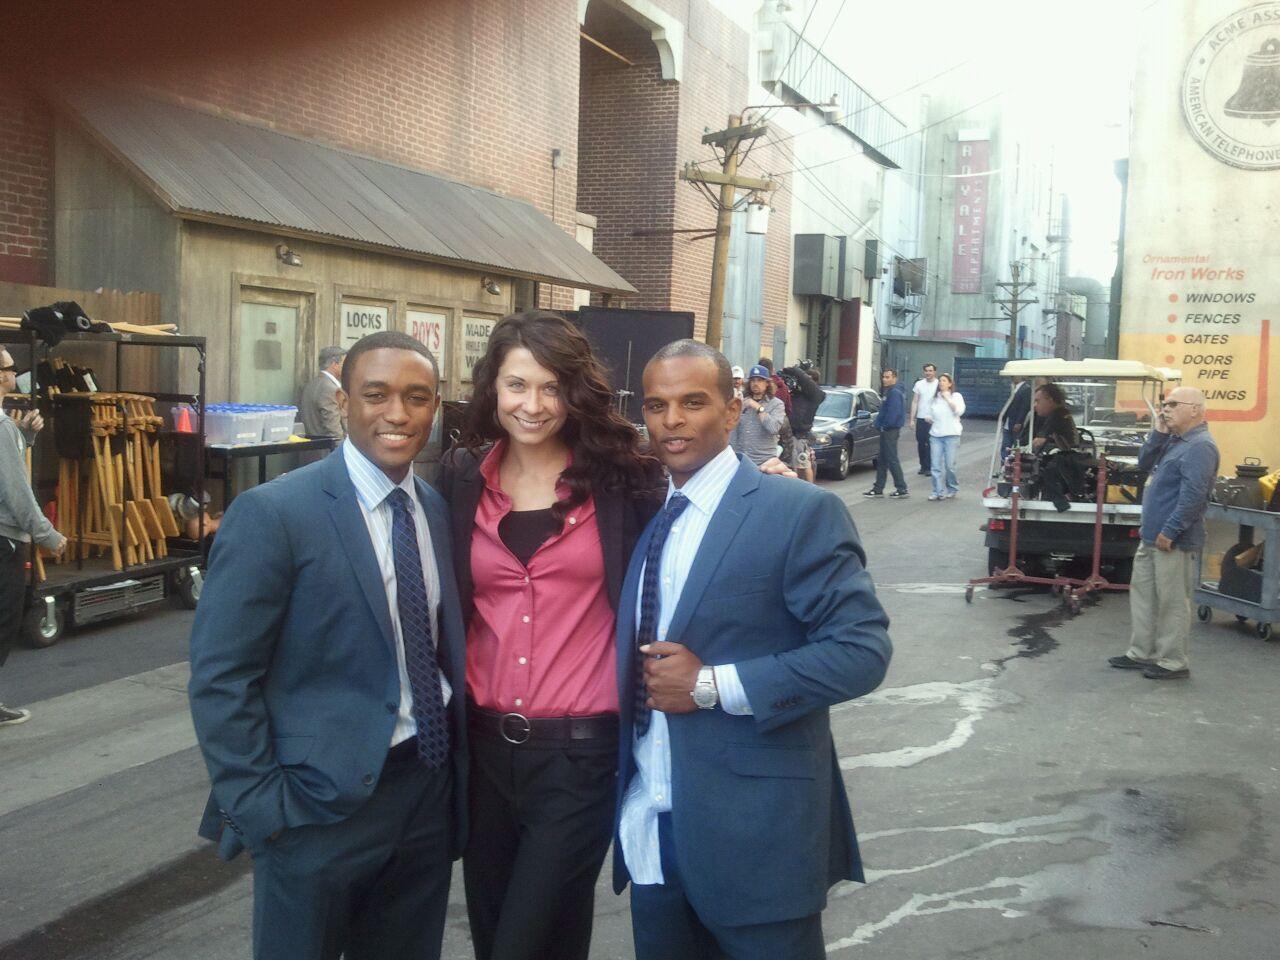 Jahnel Curfman doubling Angie Harmon on the set of Rizzoli and Isles with Lee Thompson Young and Philipos Haile